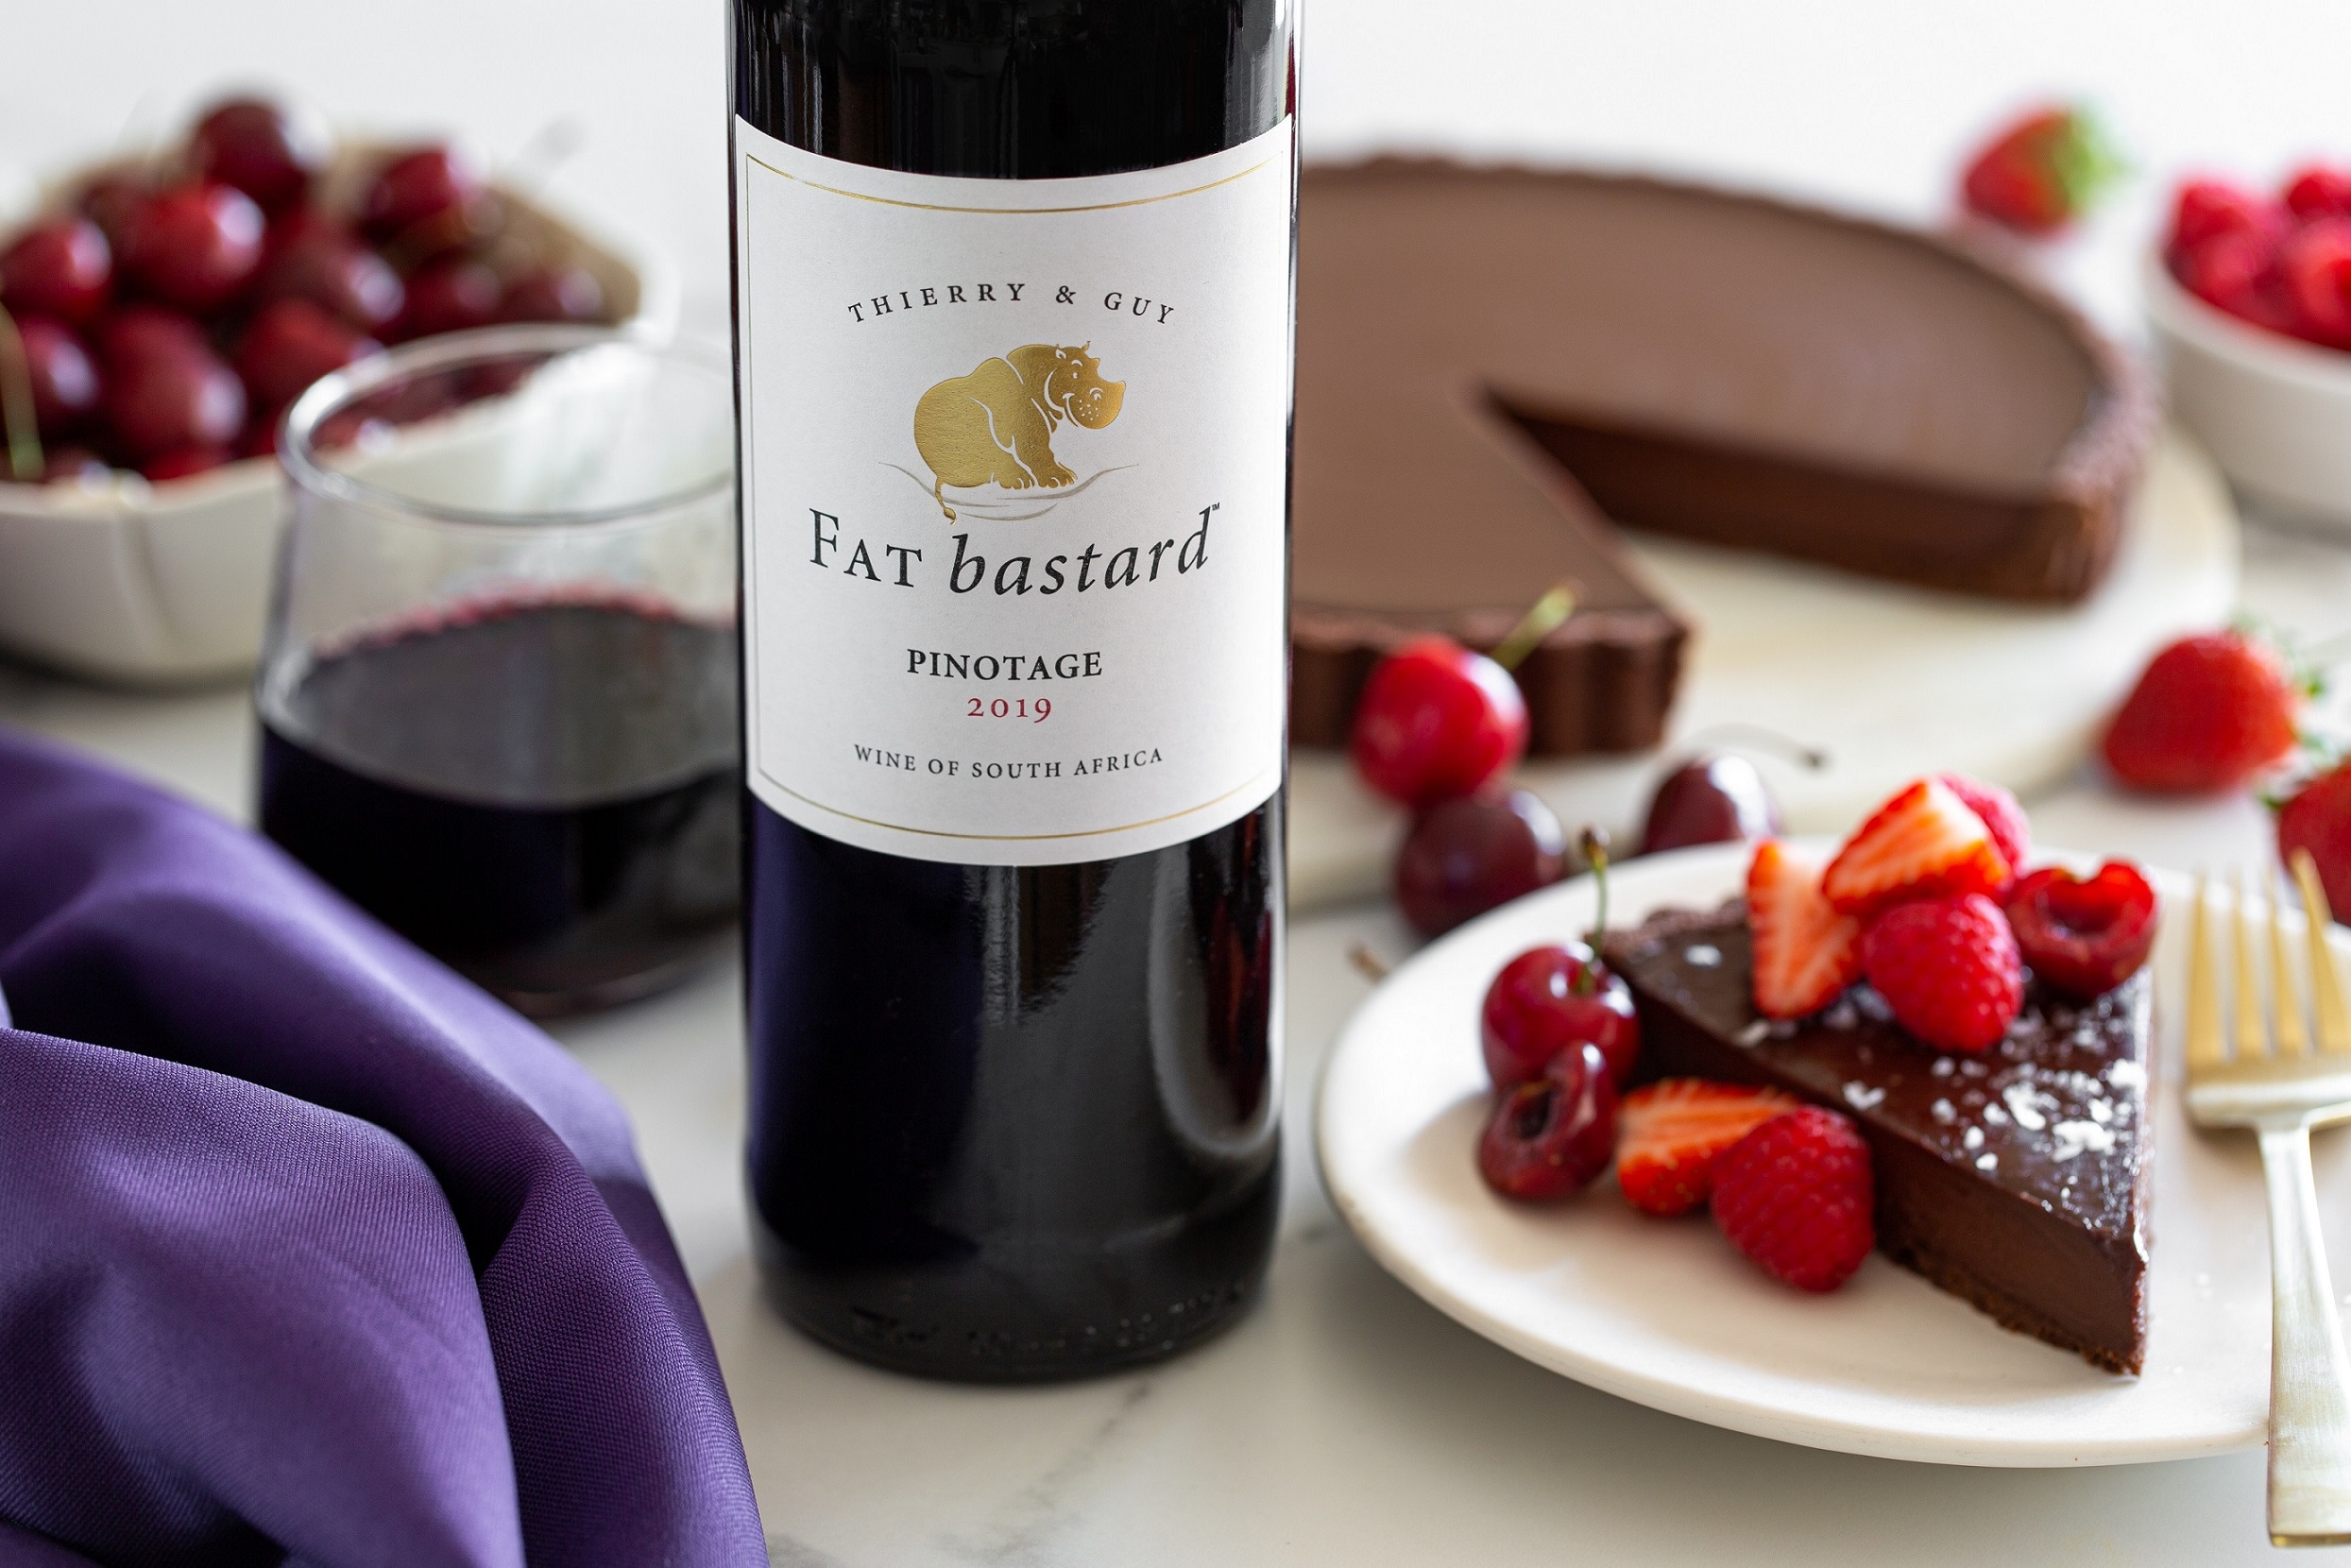 You are currently viewing Celebrate #PinotageDay on 9 October with FAT bastard Pinotage and Dark Chocolate Truffle Tart Pairing